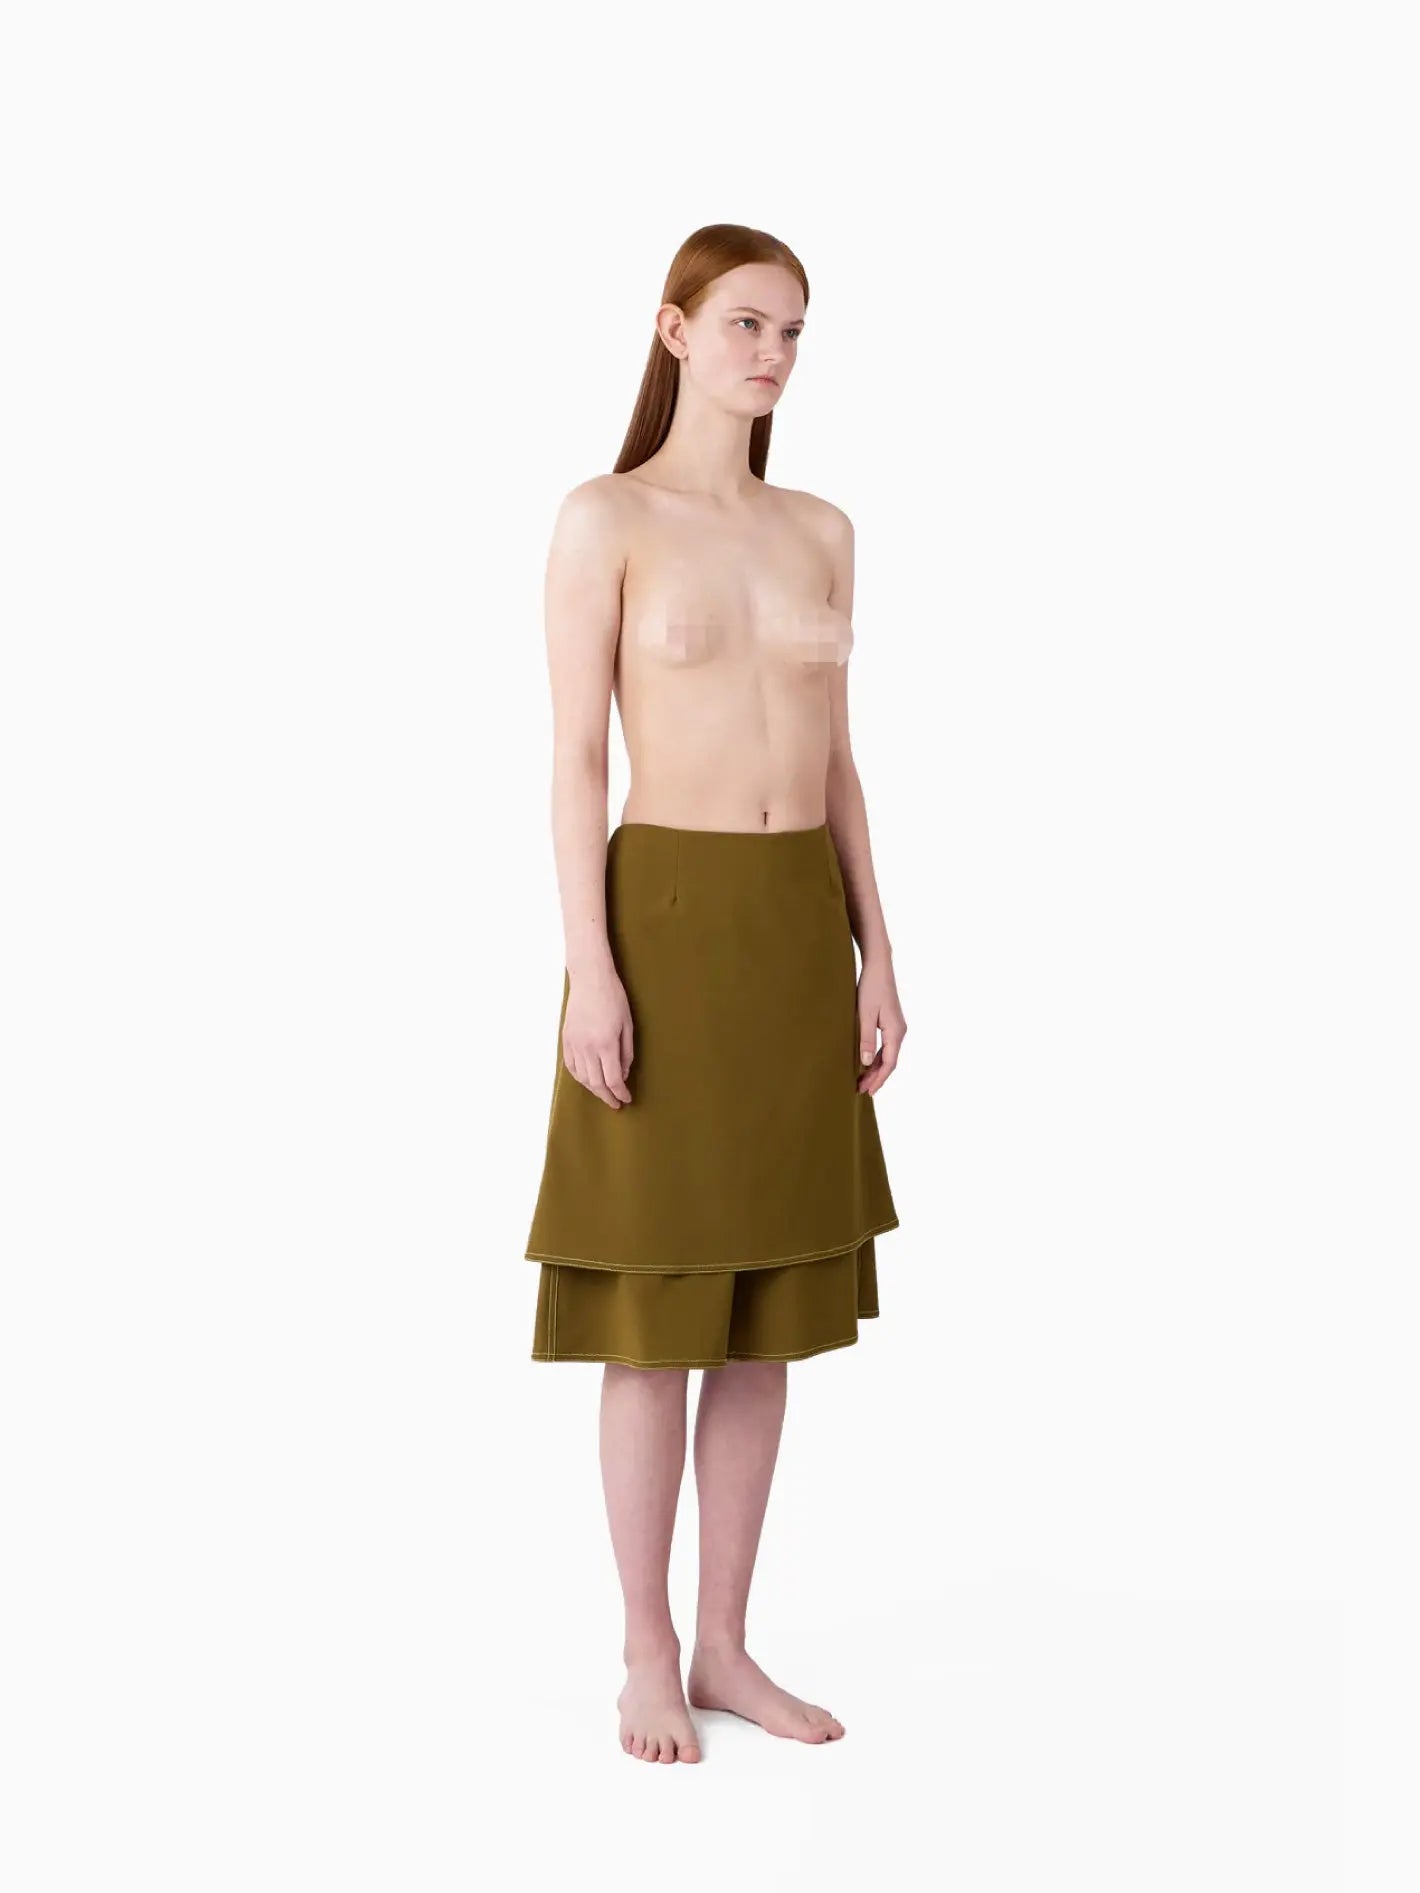 A Panta Skirt Olive Green by Sunnei is centered against a plain white background. The skirt, available at Bassalstore in Barcelona, has a straight cut, with the top layer ending above the second layer, creating a tiered look.